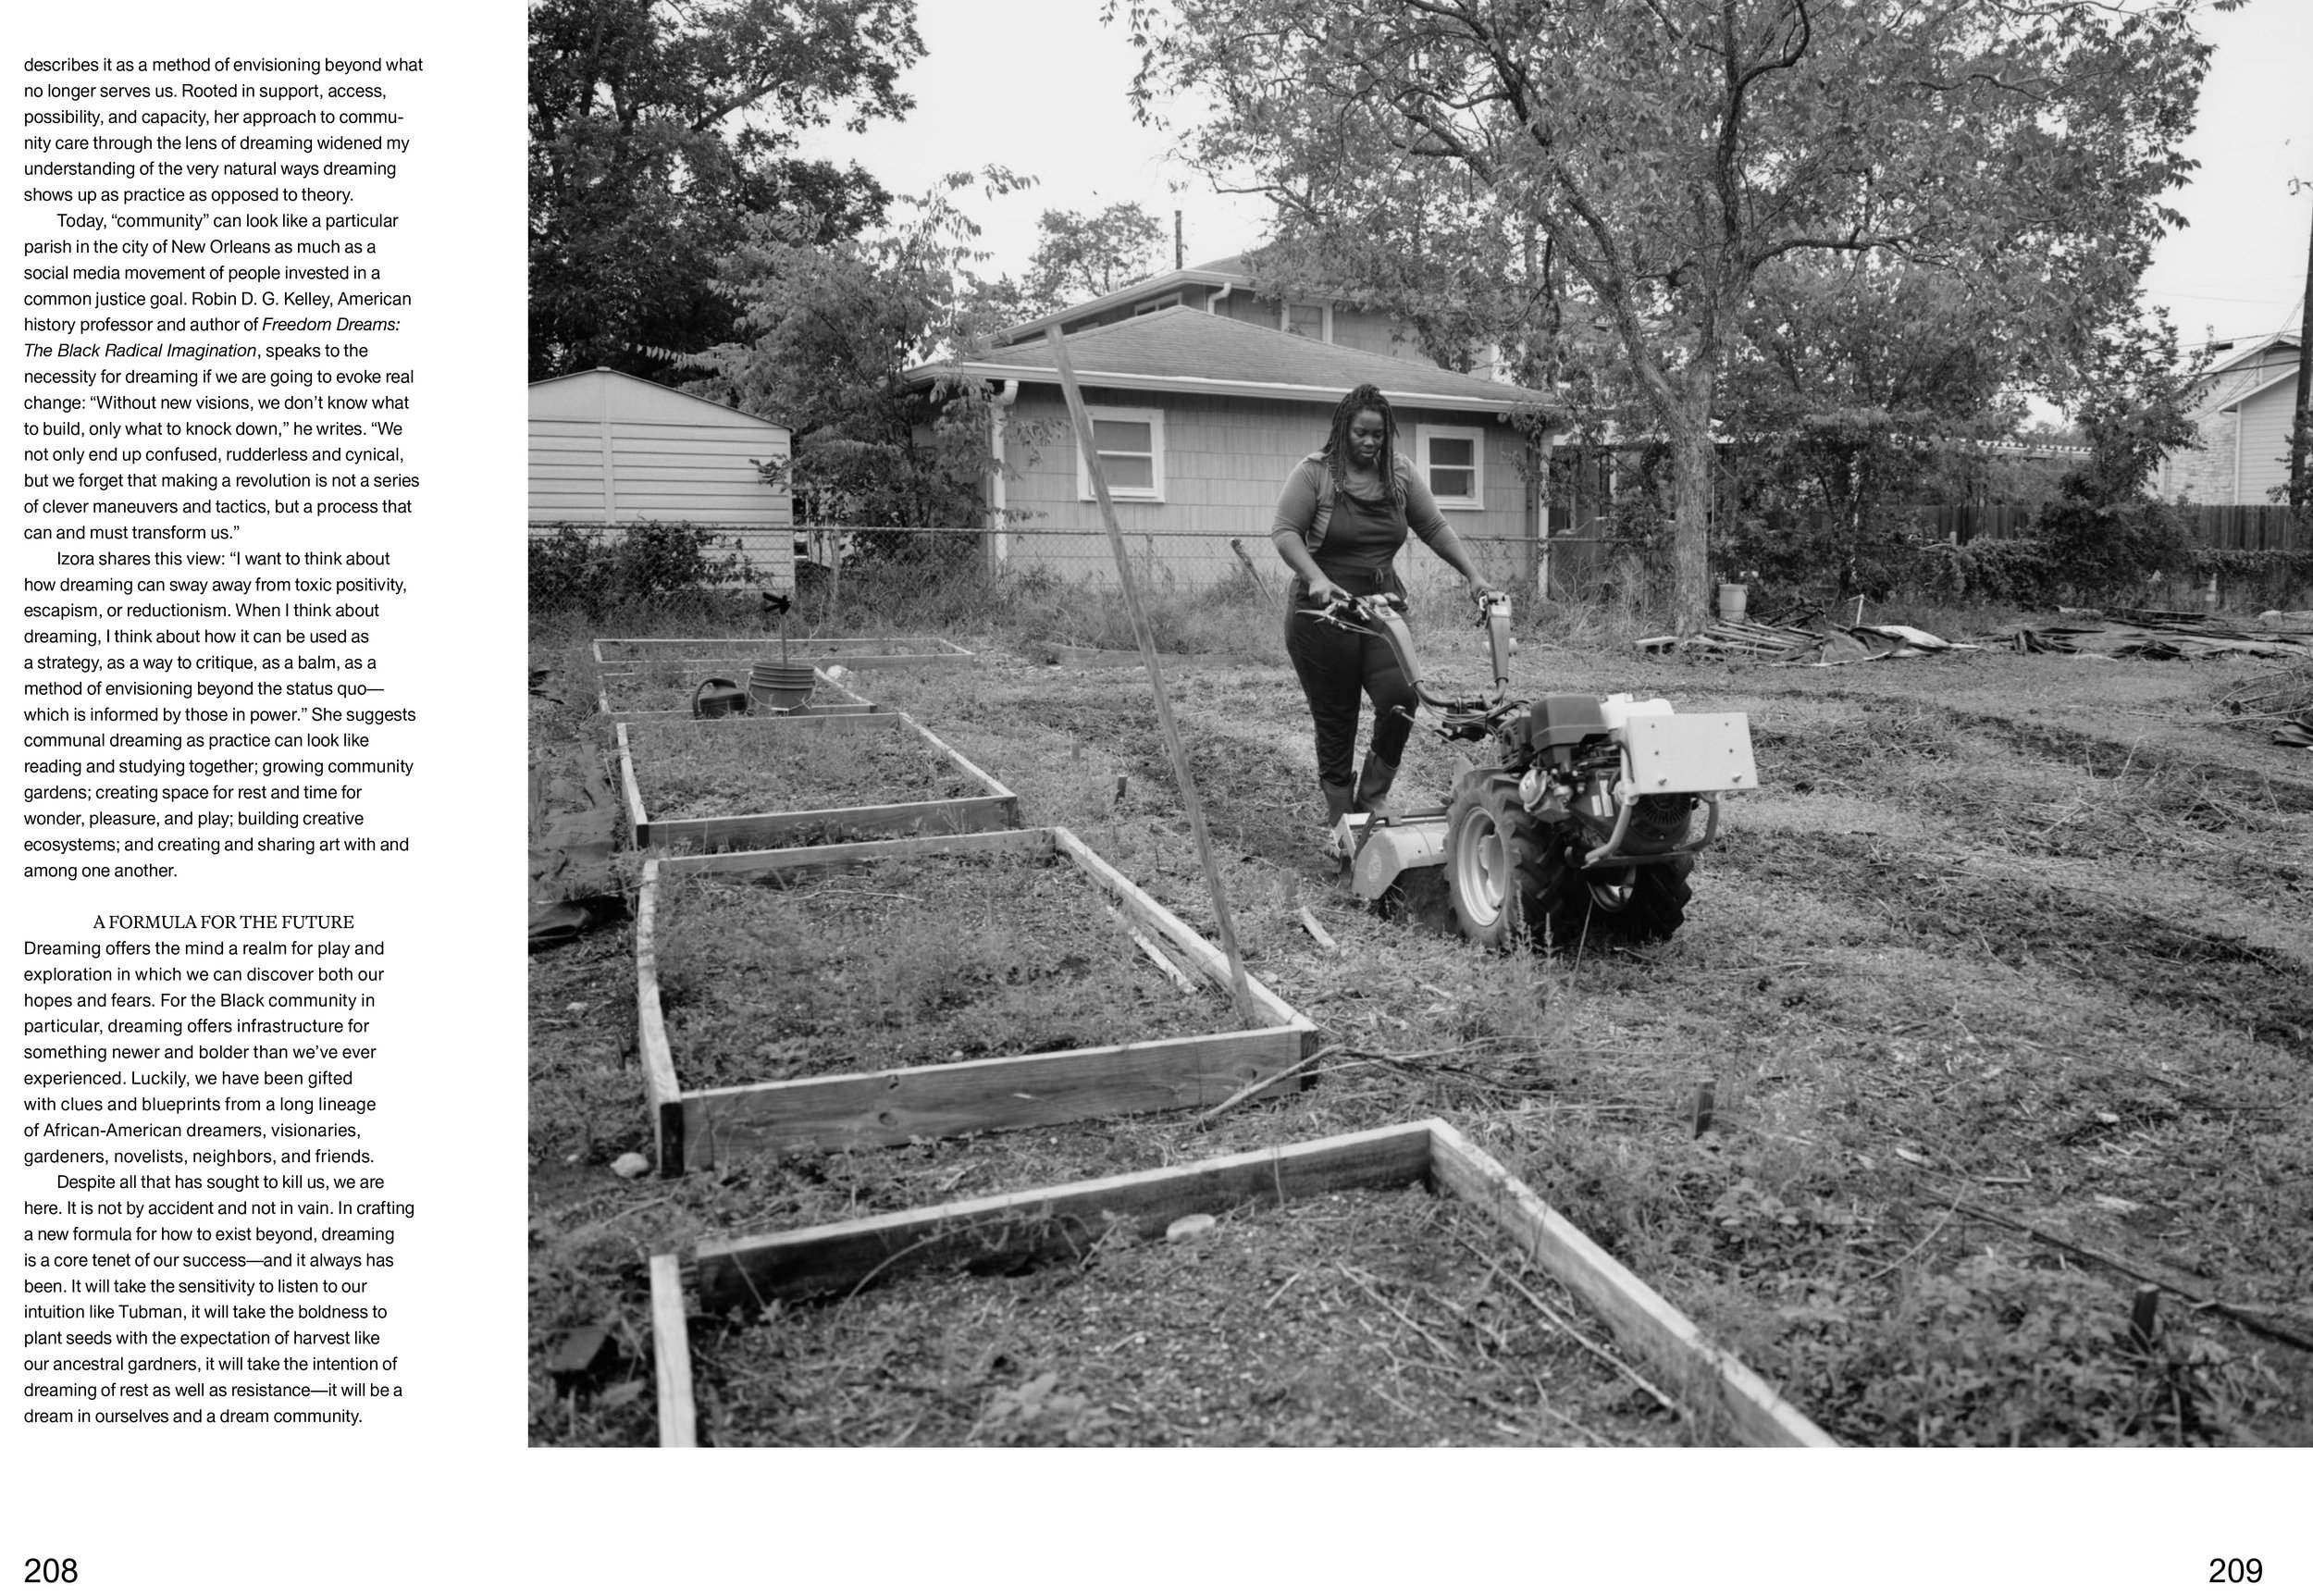  Farmer Nancy, owner of Dobbin-Kauv farm in Austin, TX. Dobbin-Kauv currently is the only Black owned farm within the city limits. 